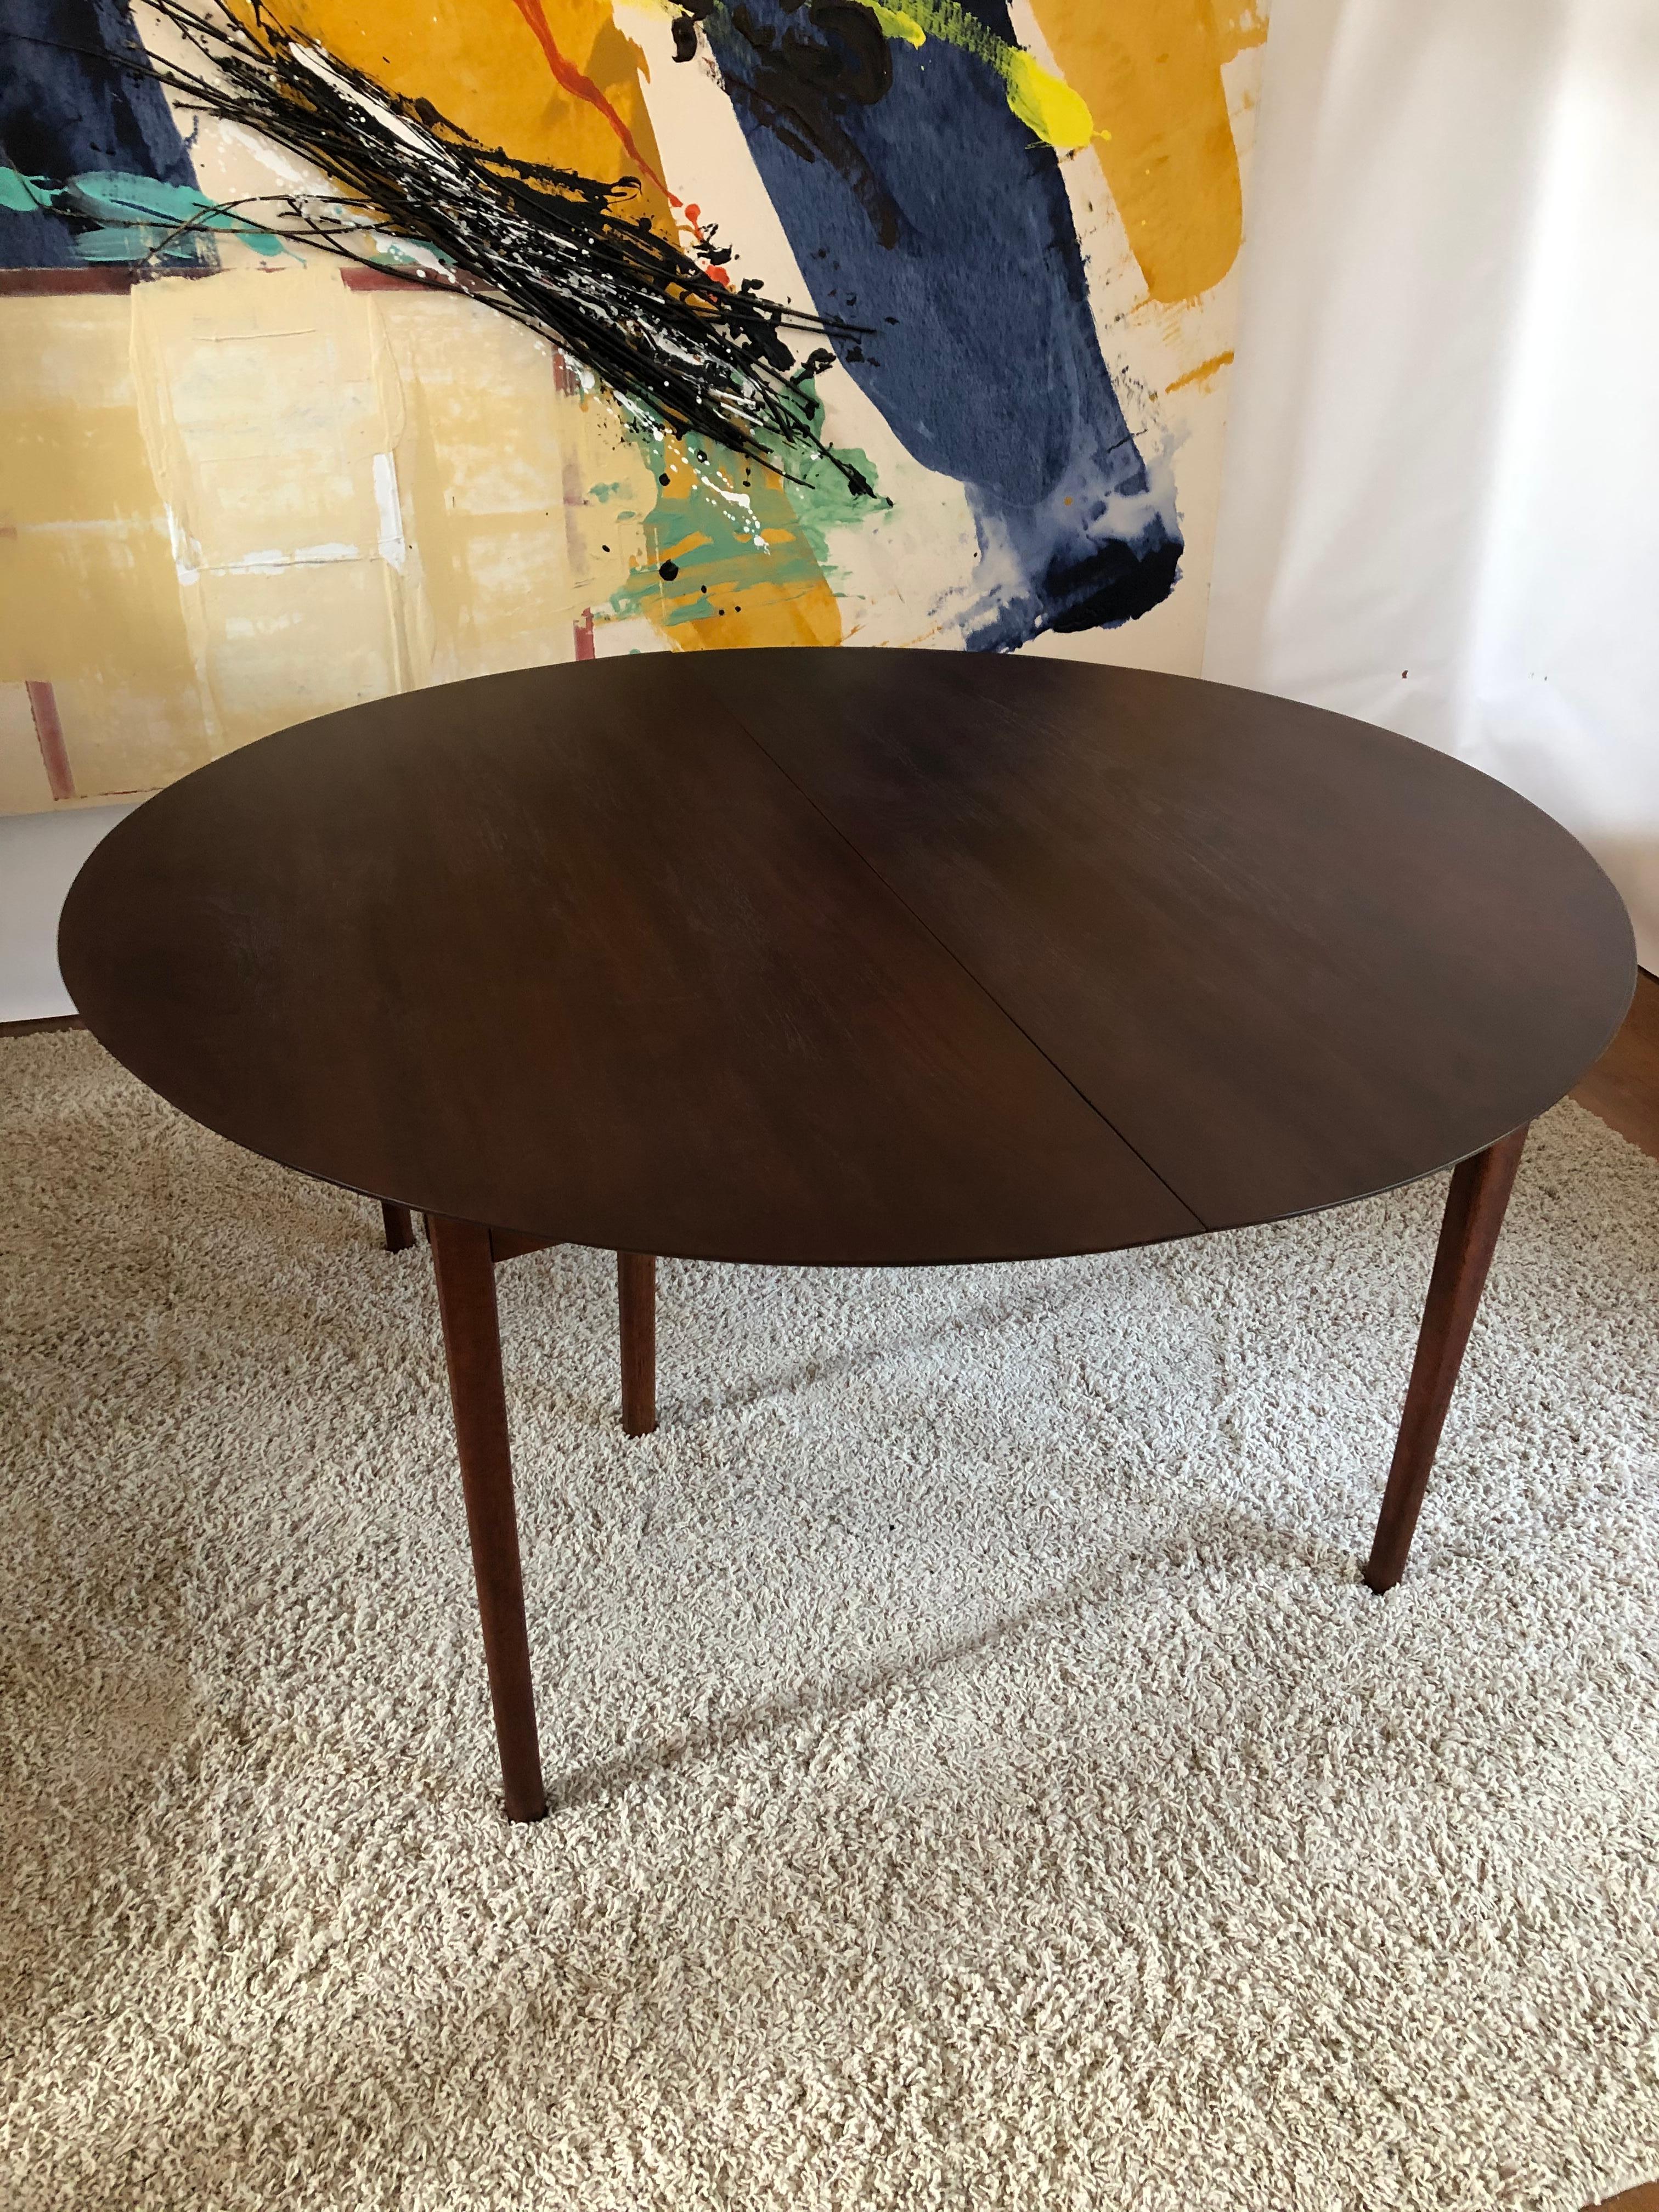 Signed Charles Webb extra large dark walnut solid oversized expandable
Dining table 5 leaves opens to 110” all leaves are different sizes, table completely hand crafted made for the original owners 1950s
So 110-112”x 4’ wide, seats at least 14. In